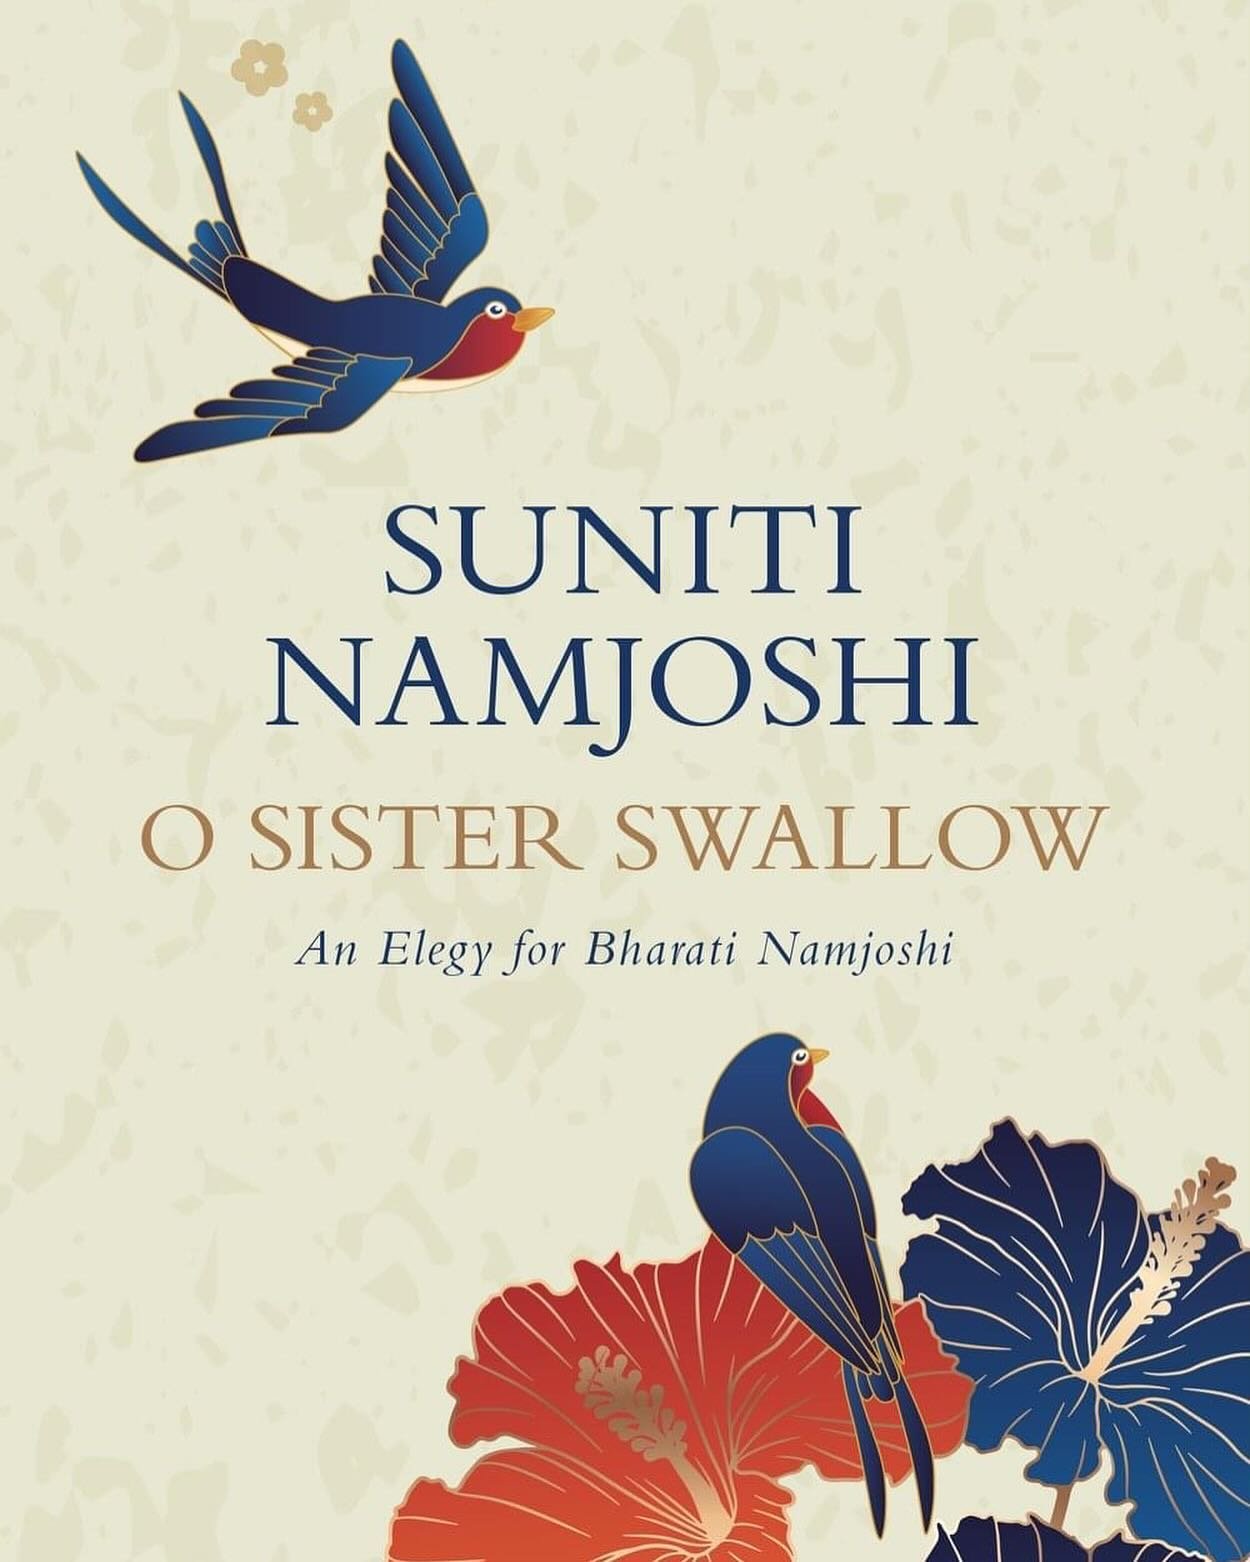 Coming soon: O Sister Swallow: An Elegy for Bharati Namjoshi, by Suniti Namjoshi

&ldquo;Shouldn&rsquo;t there be a bridge from the known to the unknown?&rdquo; 

In this exquisite elegy, Suniti Namjoshi reflects on the life of her sister Bharati, th